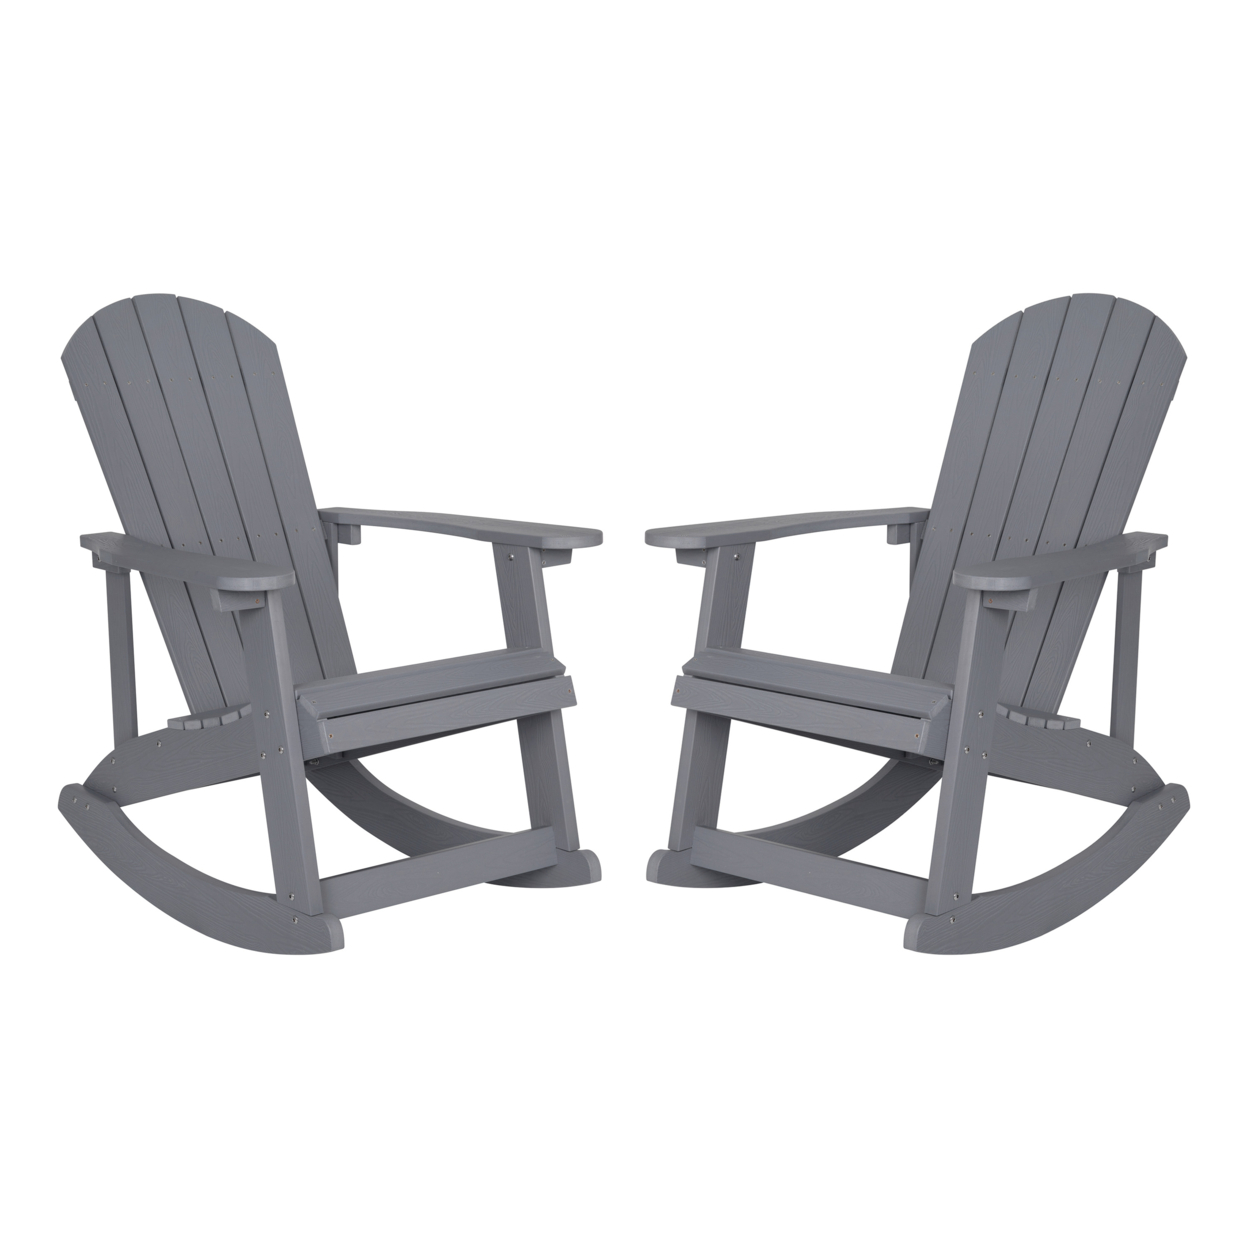 Savannah All-Weather Poly Resin Wood Adirondack Rocking Chair With Rust Resistant Stainless Steel Hardware In Gray - Set Of 2